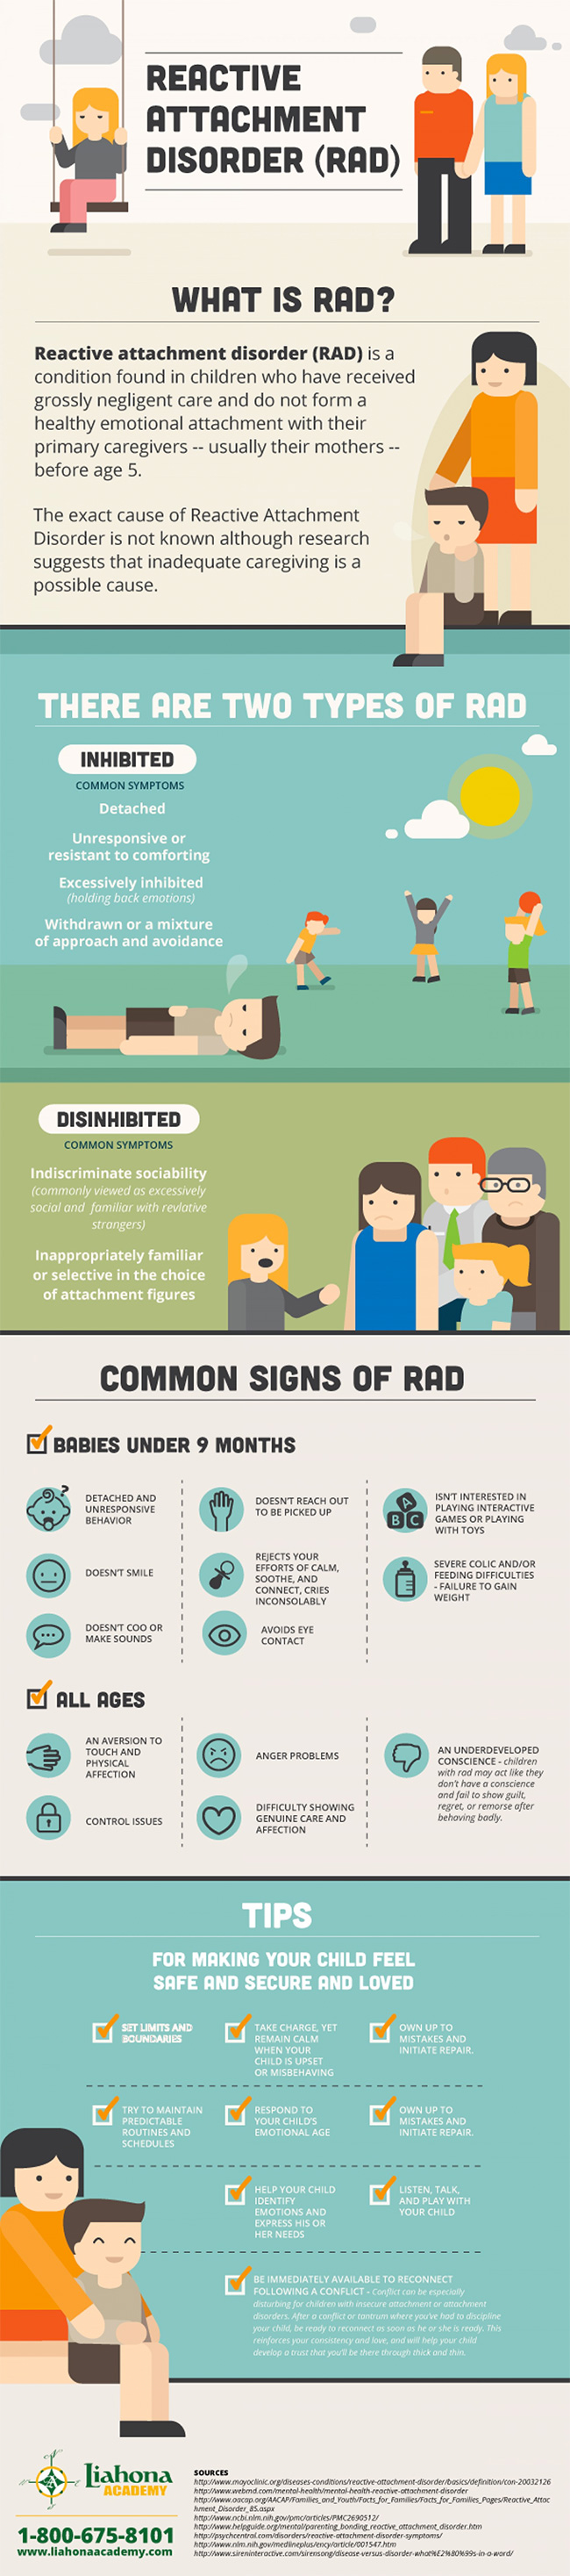 Reactive Attachment Disorder infographic